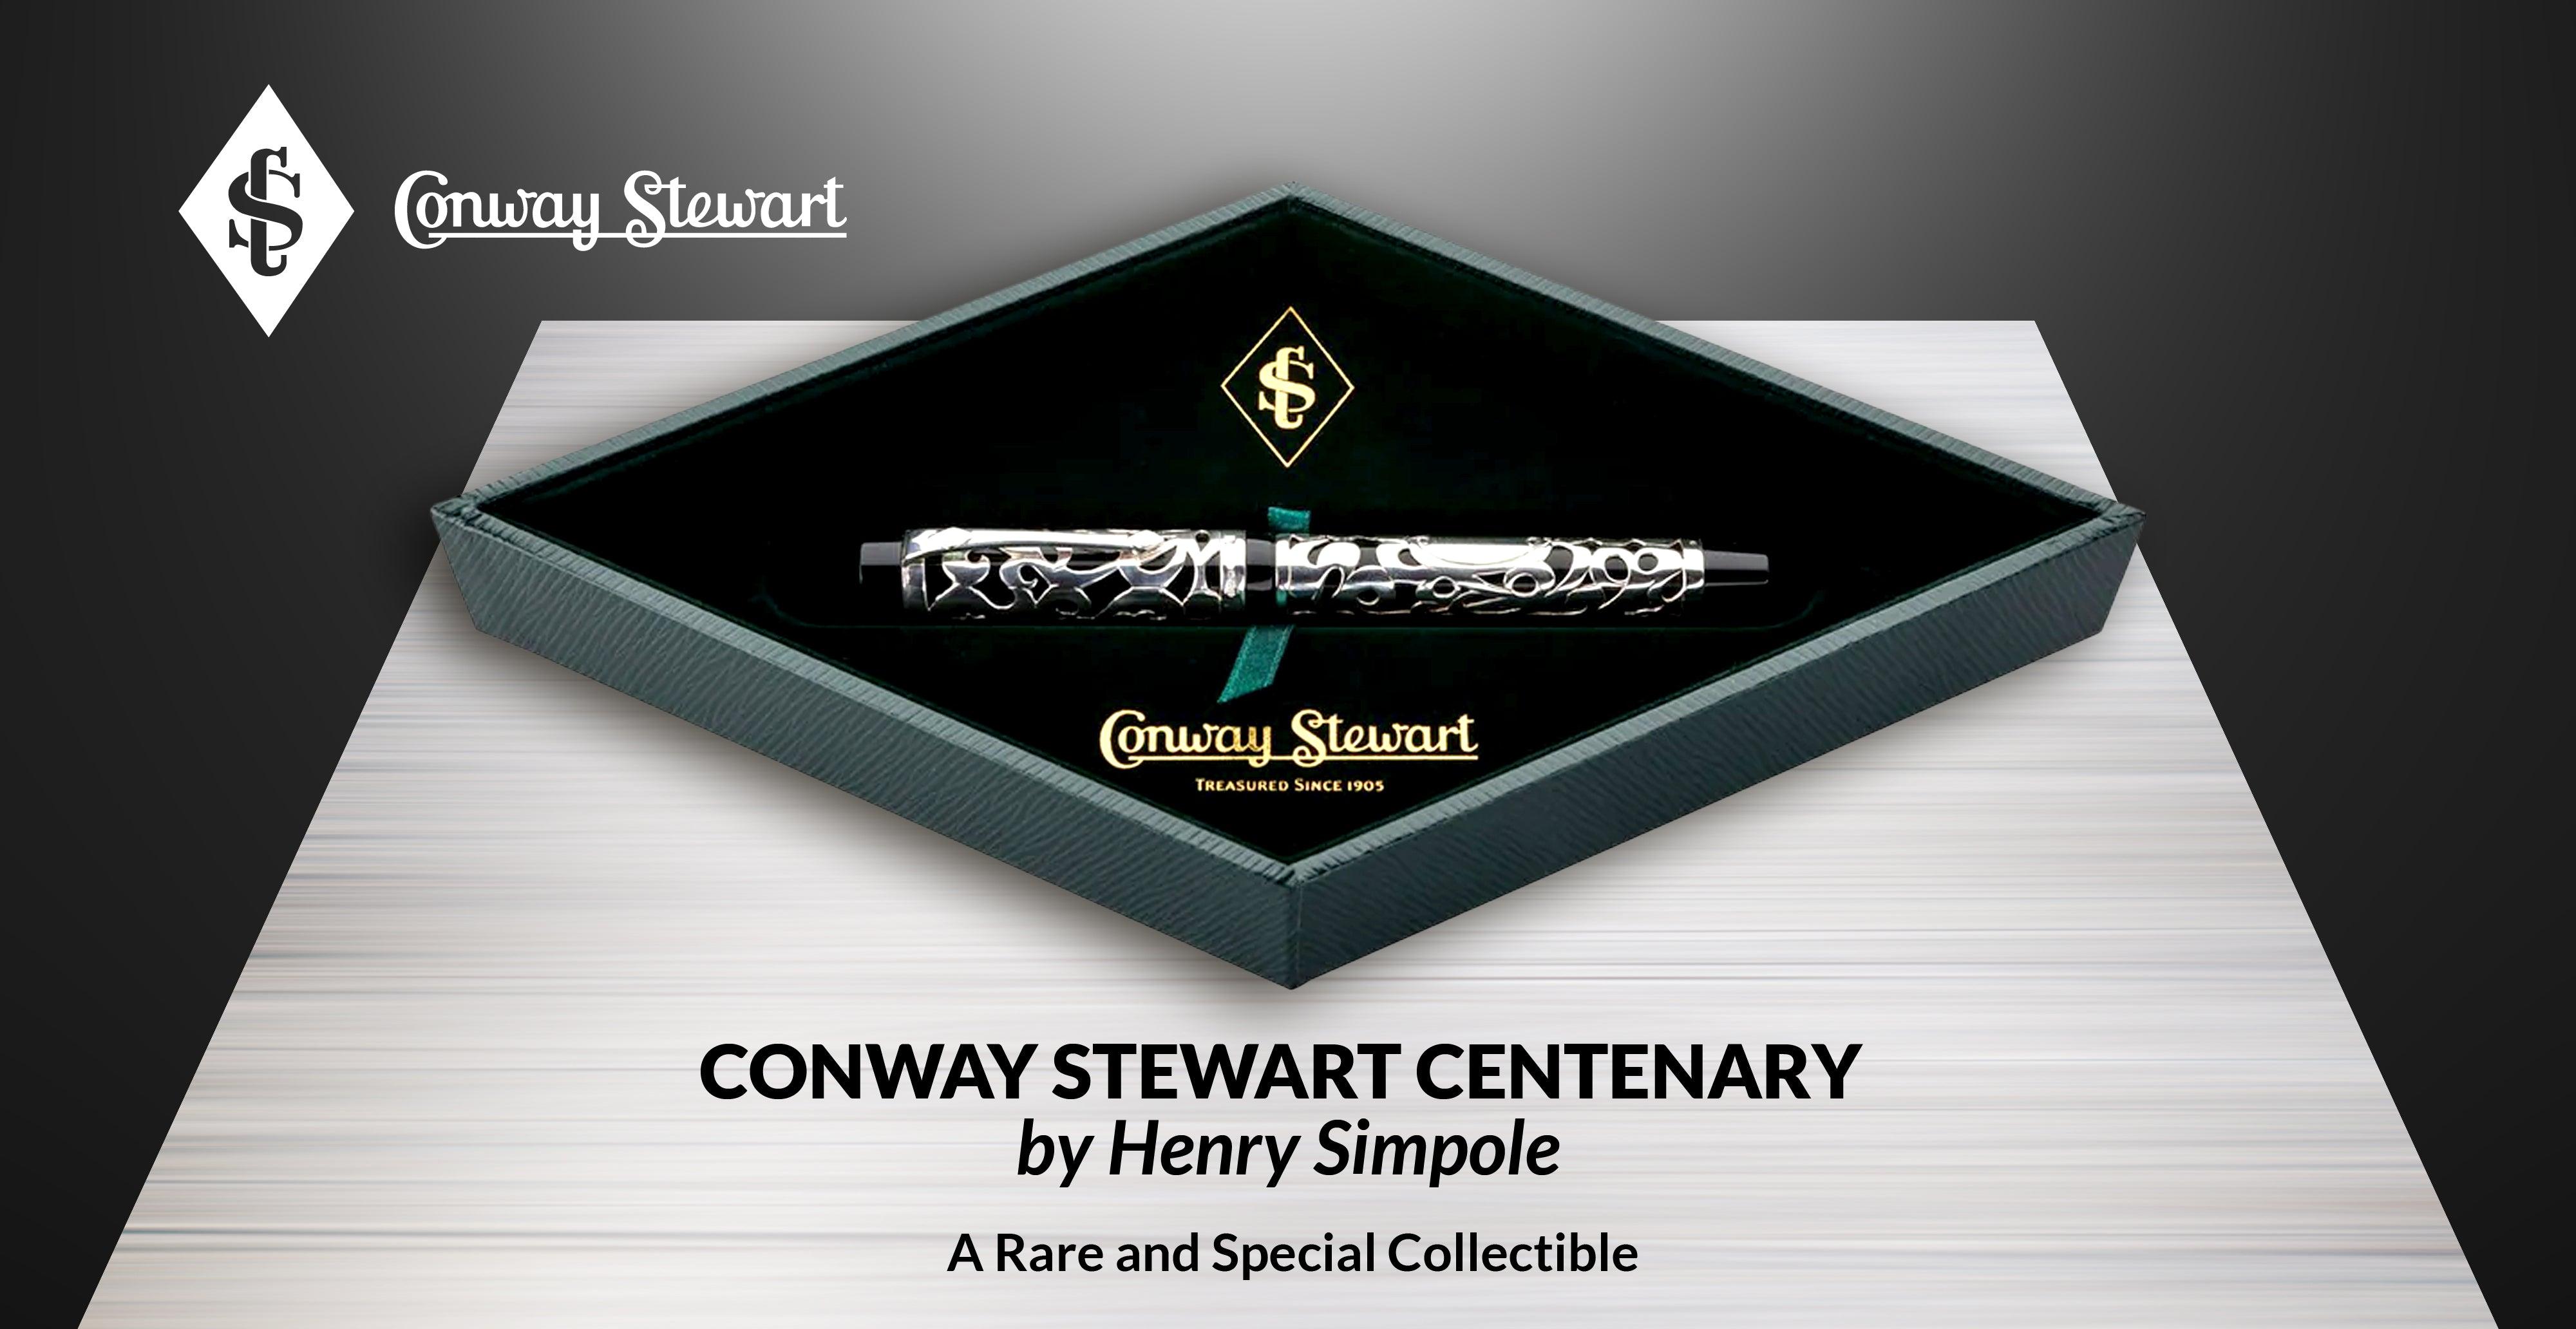 Conway Stewart Centenary pen by Henry Simpole, 2004 - Conway Stewart